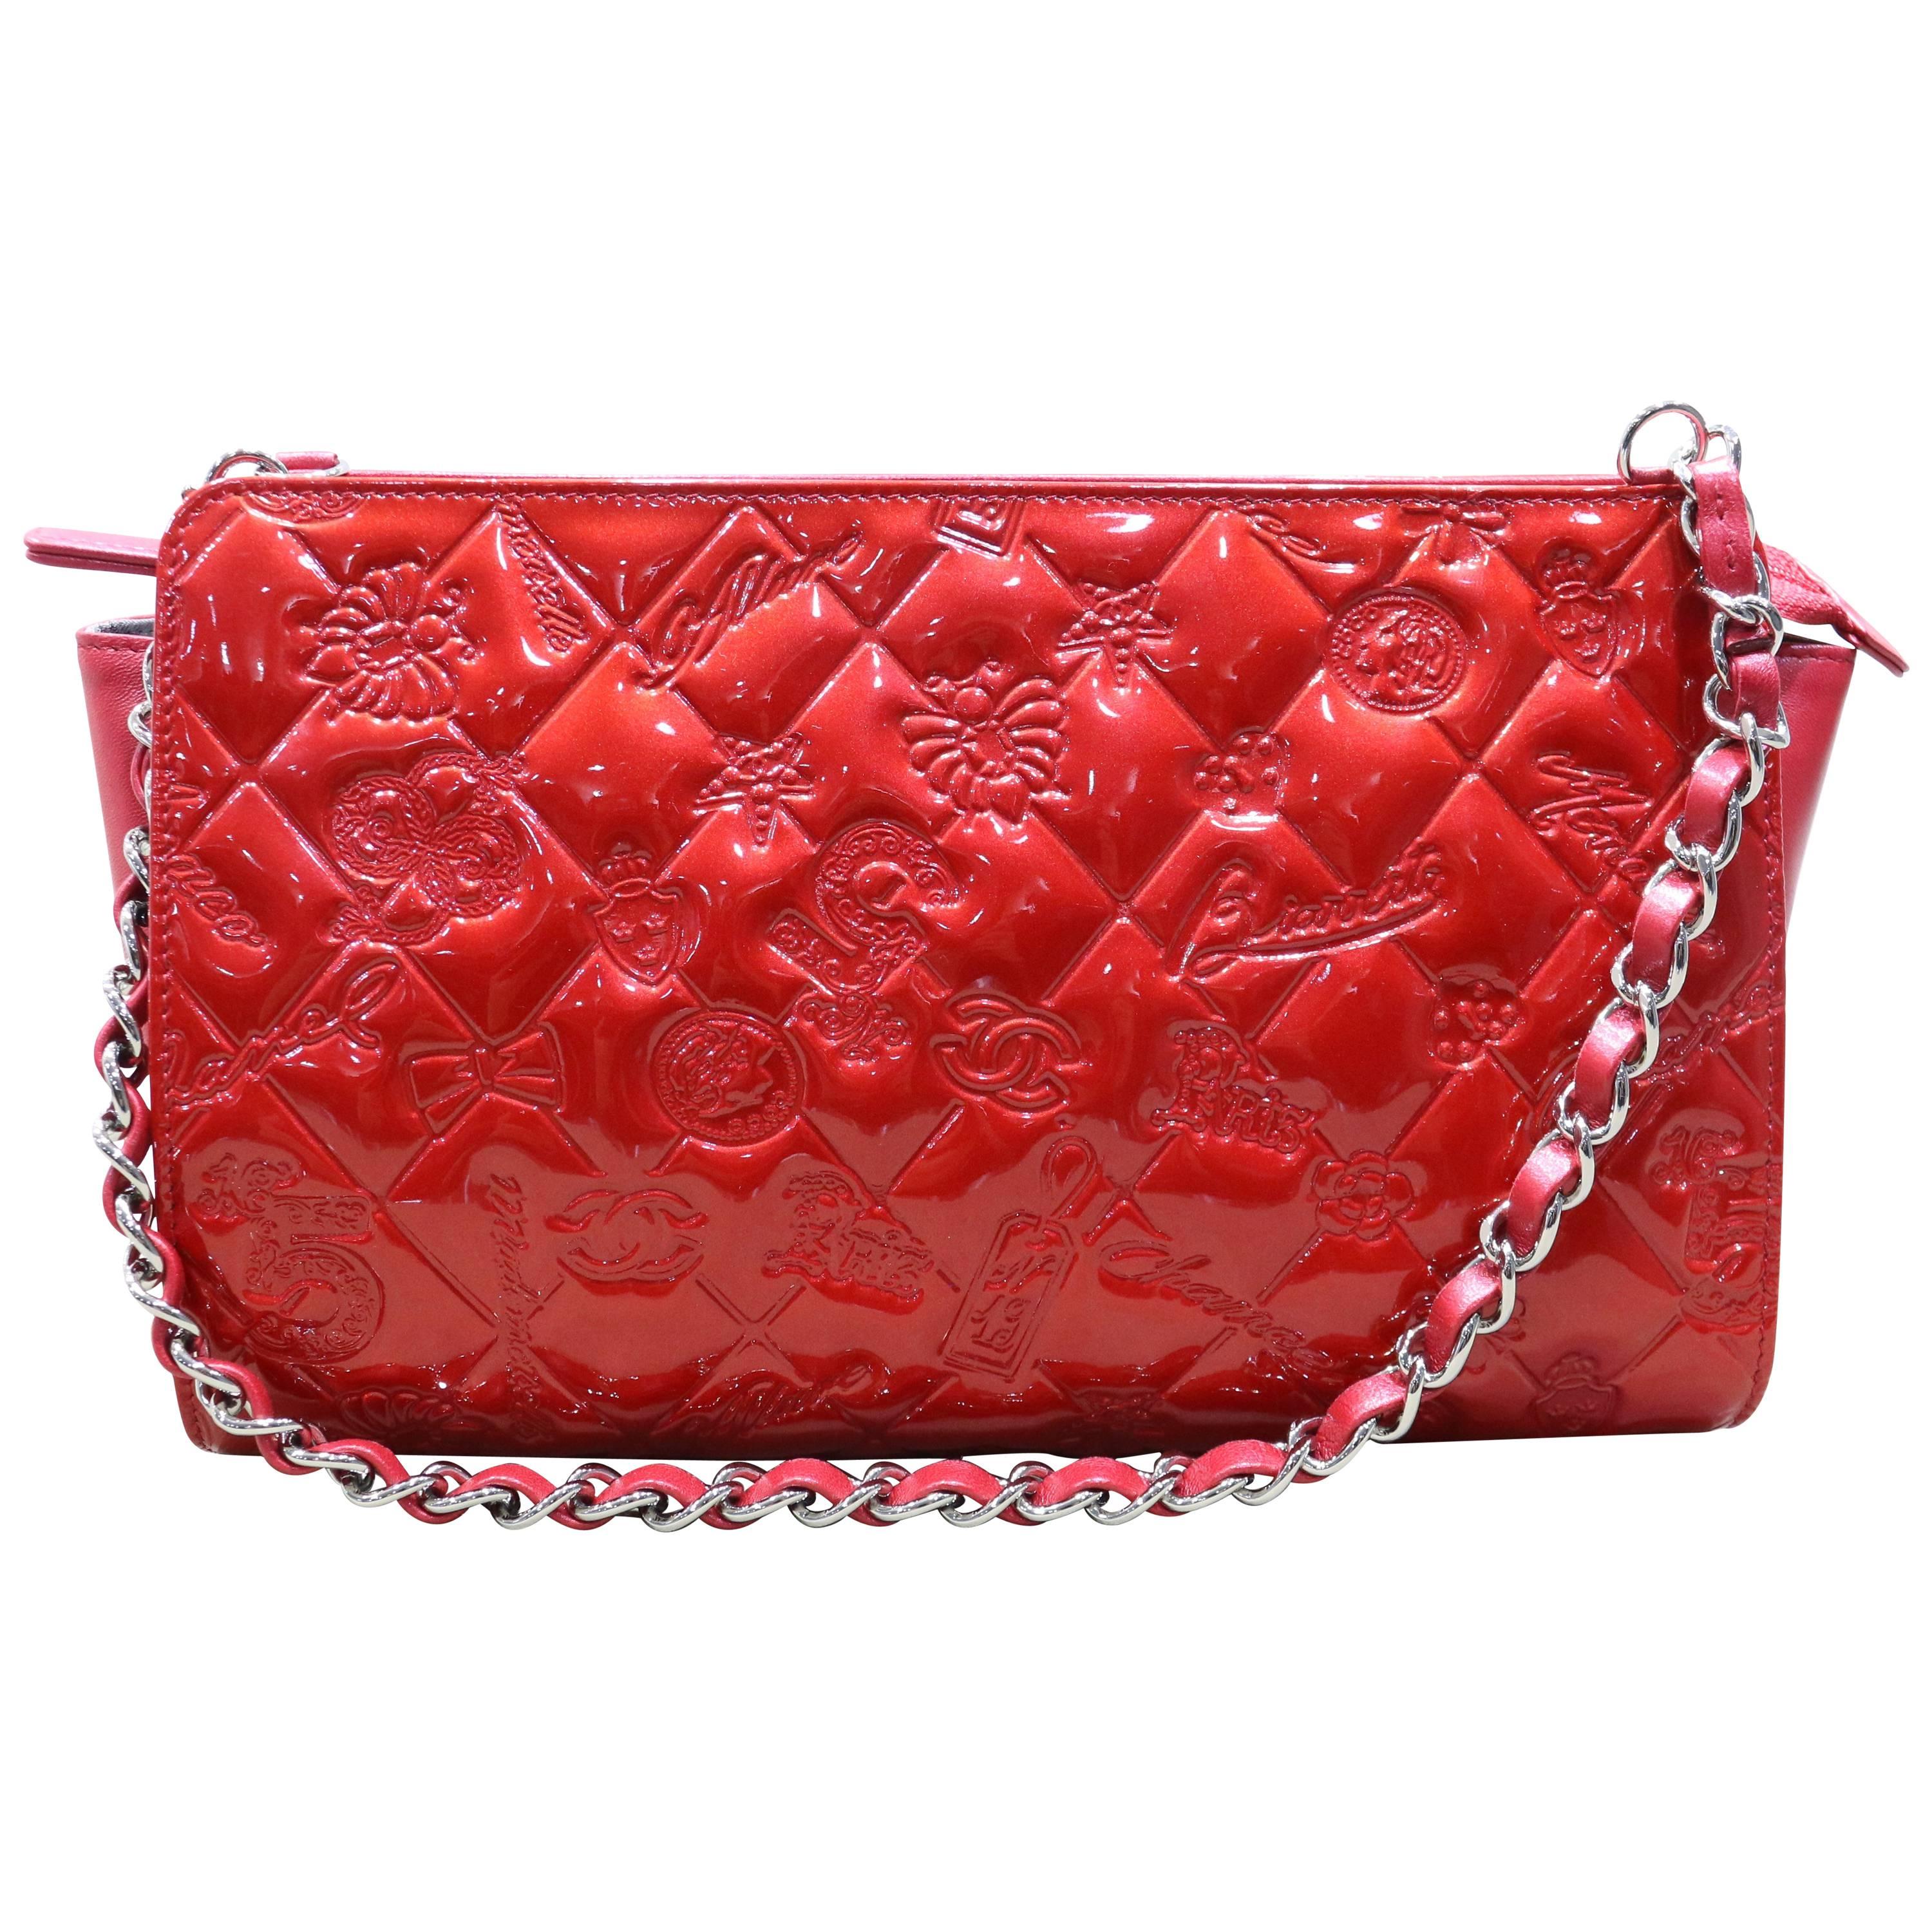 Chanel Red Patent and Lamb Icon motif Porch Bag